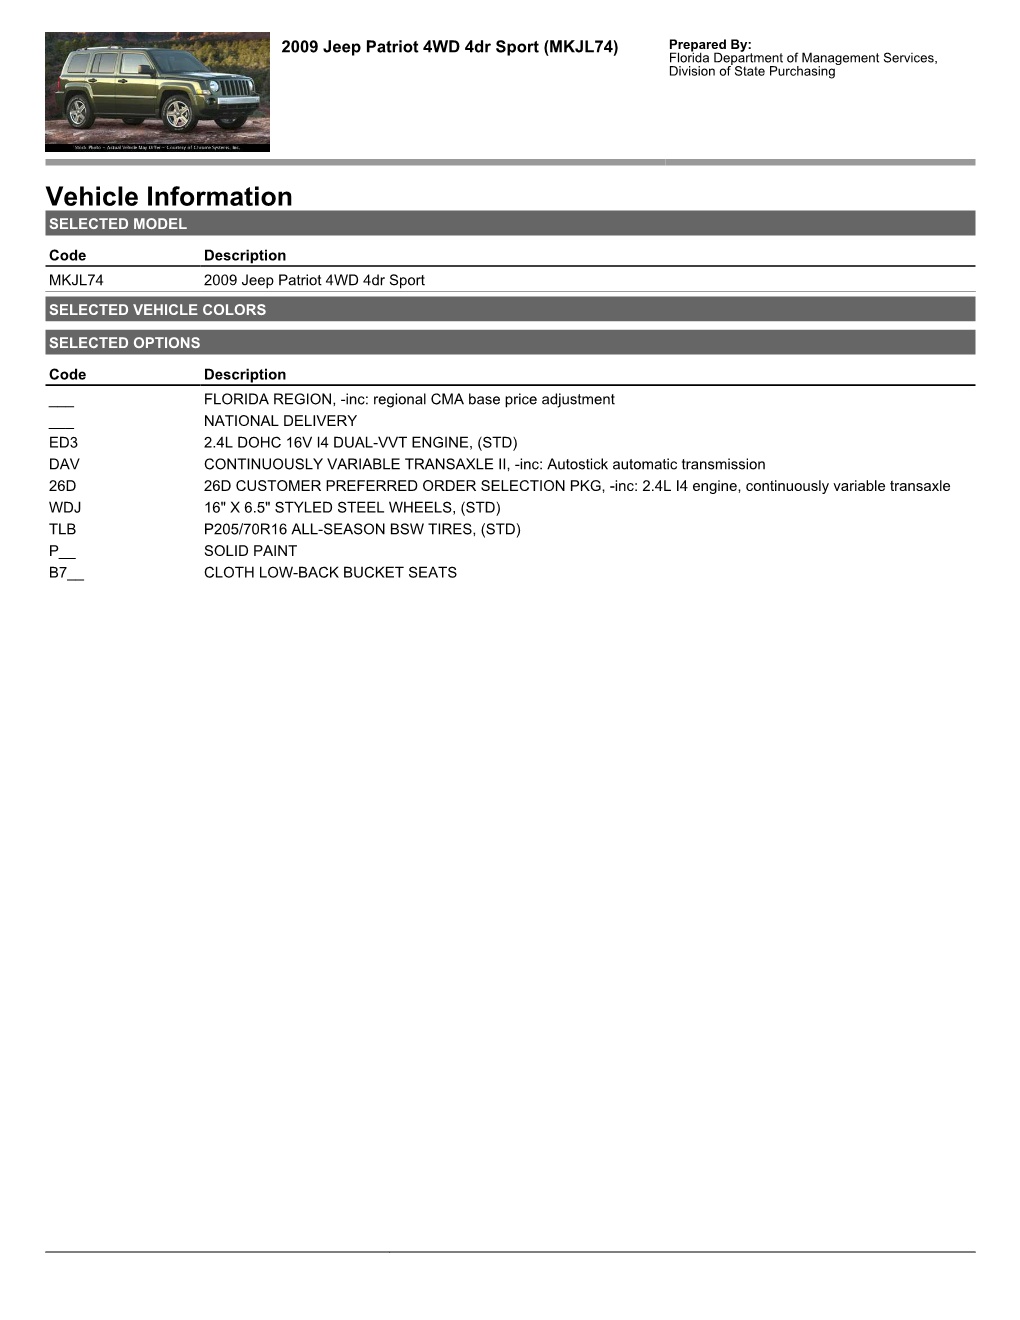 Vehicle Information SELECTED MODEL